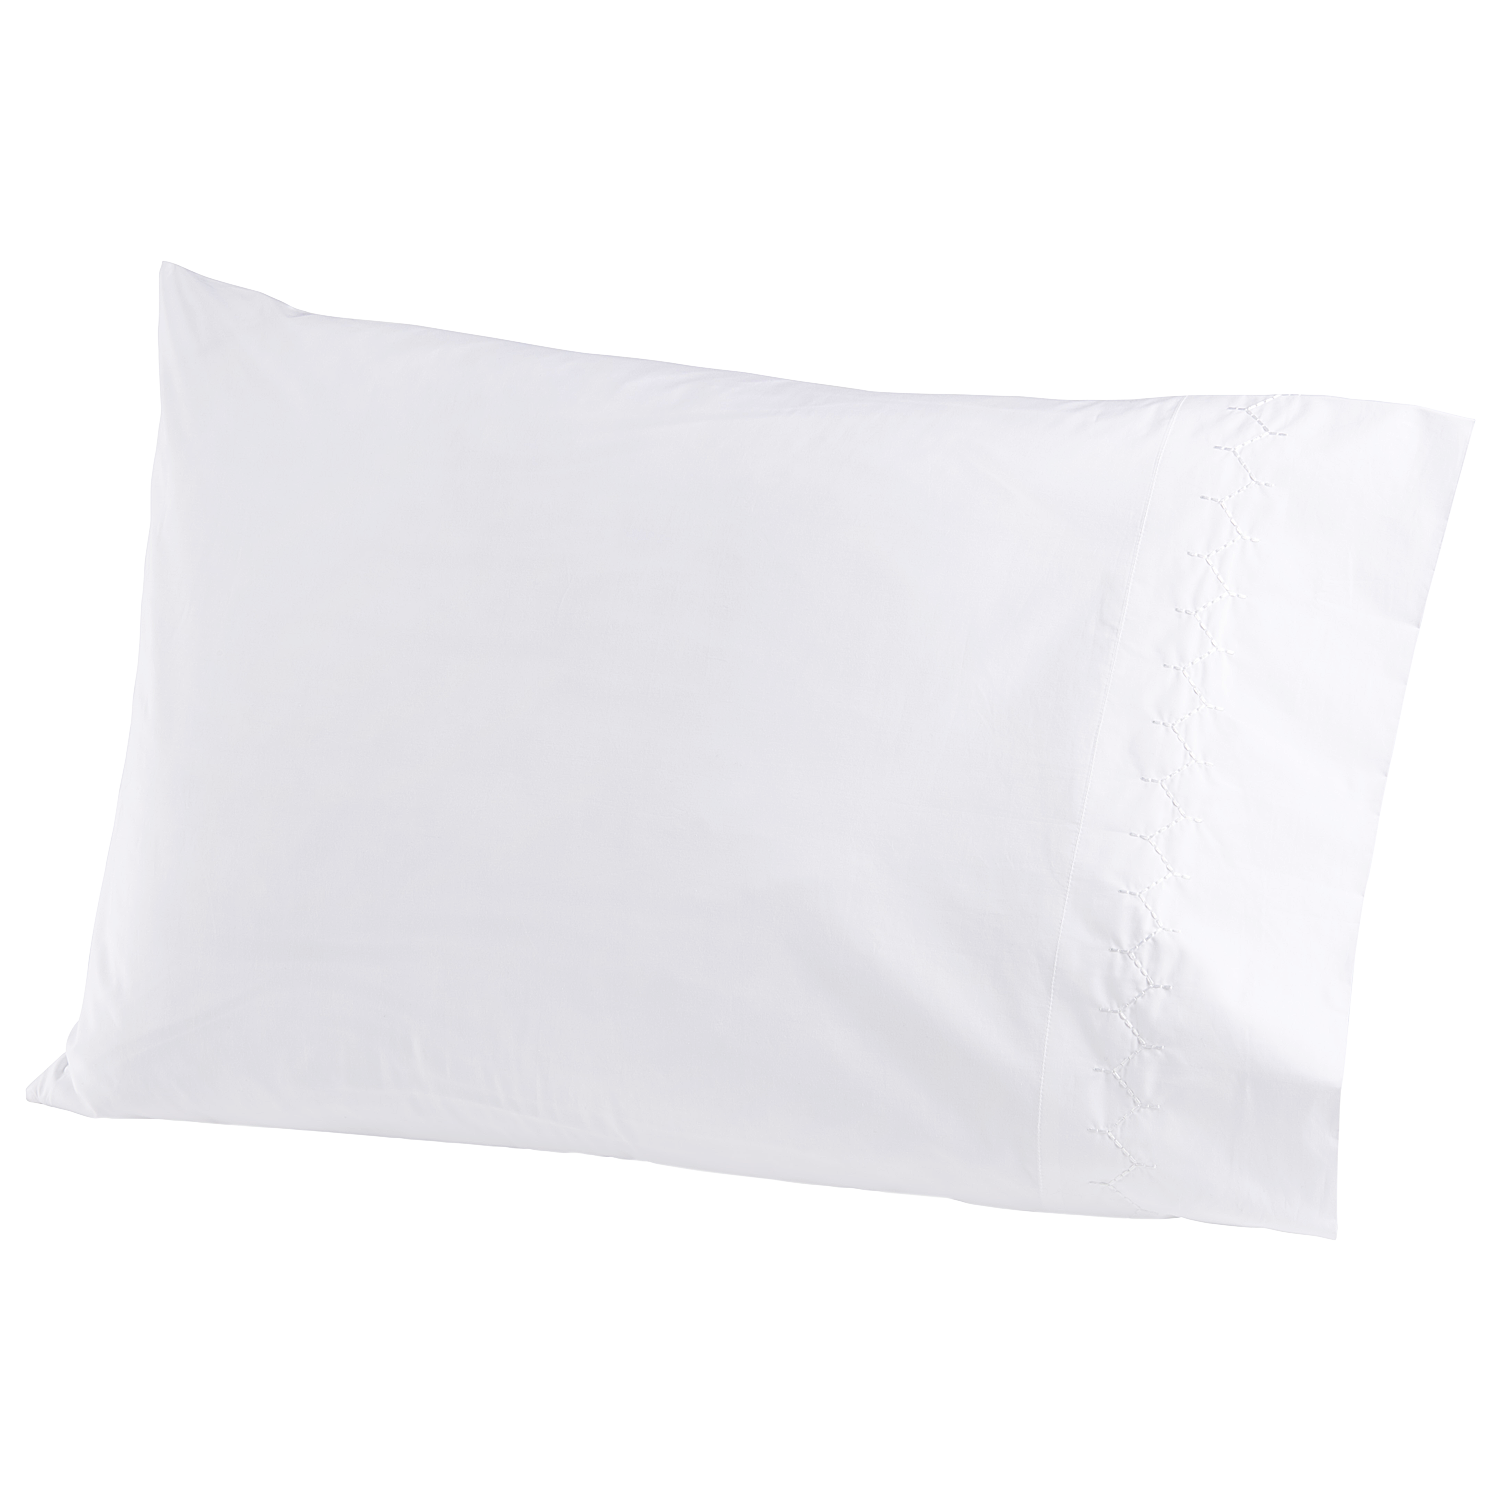 Stitched White Sheets & Cases